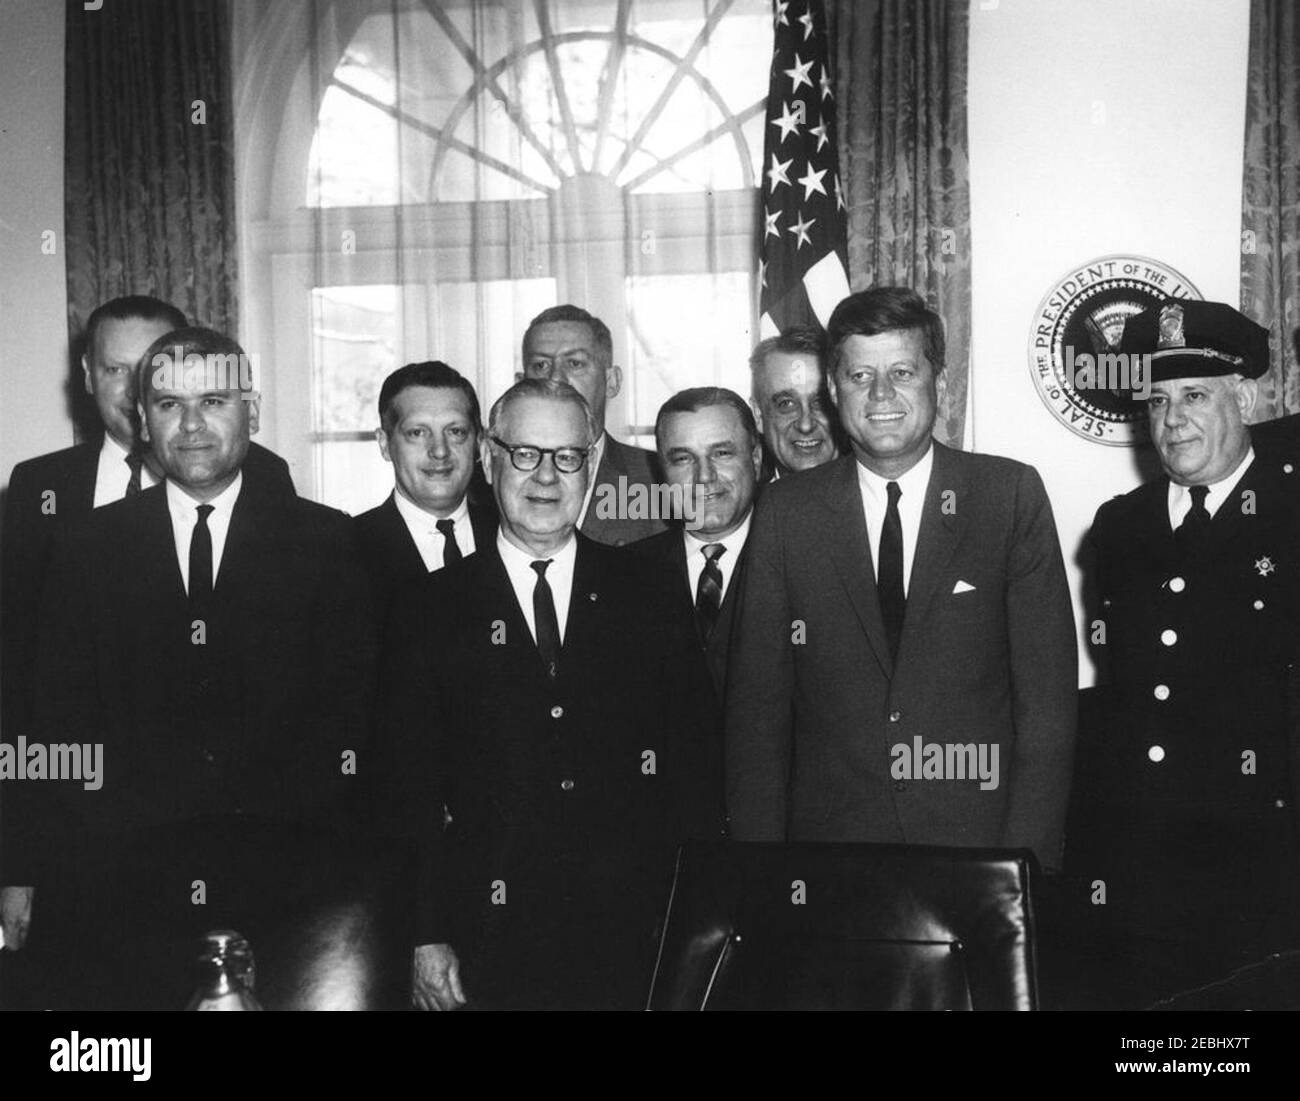 Visit of police officers to mark National Police Week, 12:53PM. President John F. Kennedy visits with police officers to mark the first annual National Police Week. Left to right: Lieutenant Thomas Herlihy, of the Metropolitan Washington Police Department (in back); acting Director of the United States Park Police, Nash Castro; unidentified (in back); President of the International Association of Chiefs of Police (IACP), Frank A. Sweeney; unidentified (behind Mr. Sweeney); unidentified; Secretary-treasurer of the National Conference of Police Associations, Royce L. Givens (in back); President Stock Photo